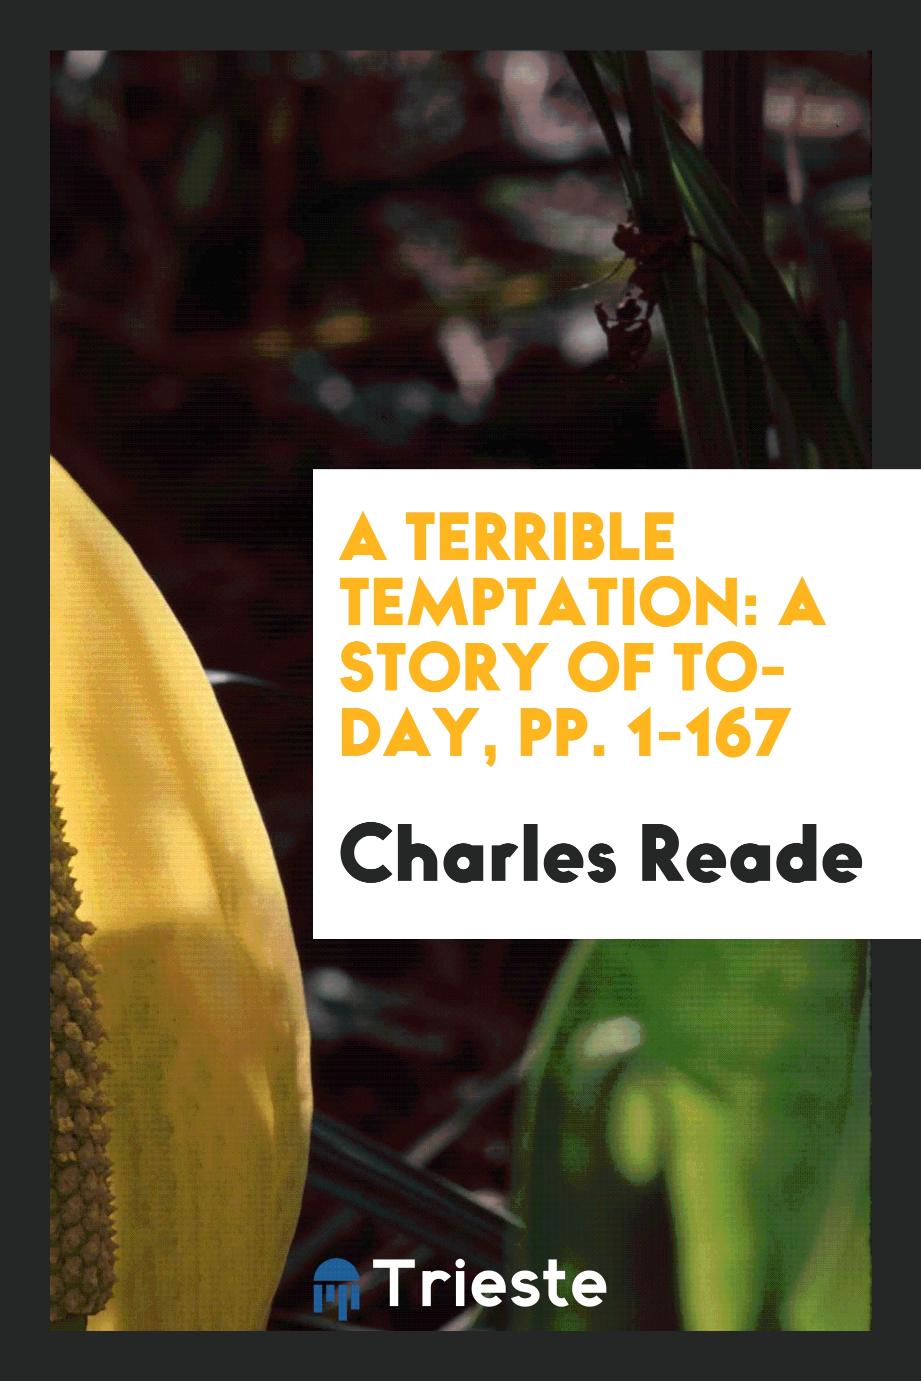 A Terrible Temptation: A Story of to-Day, pp. 1-167